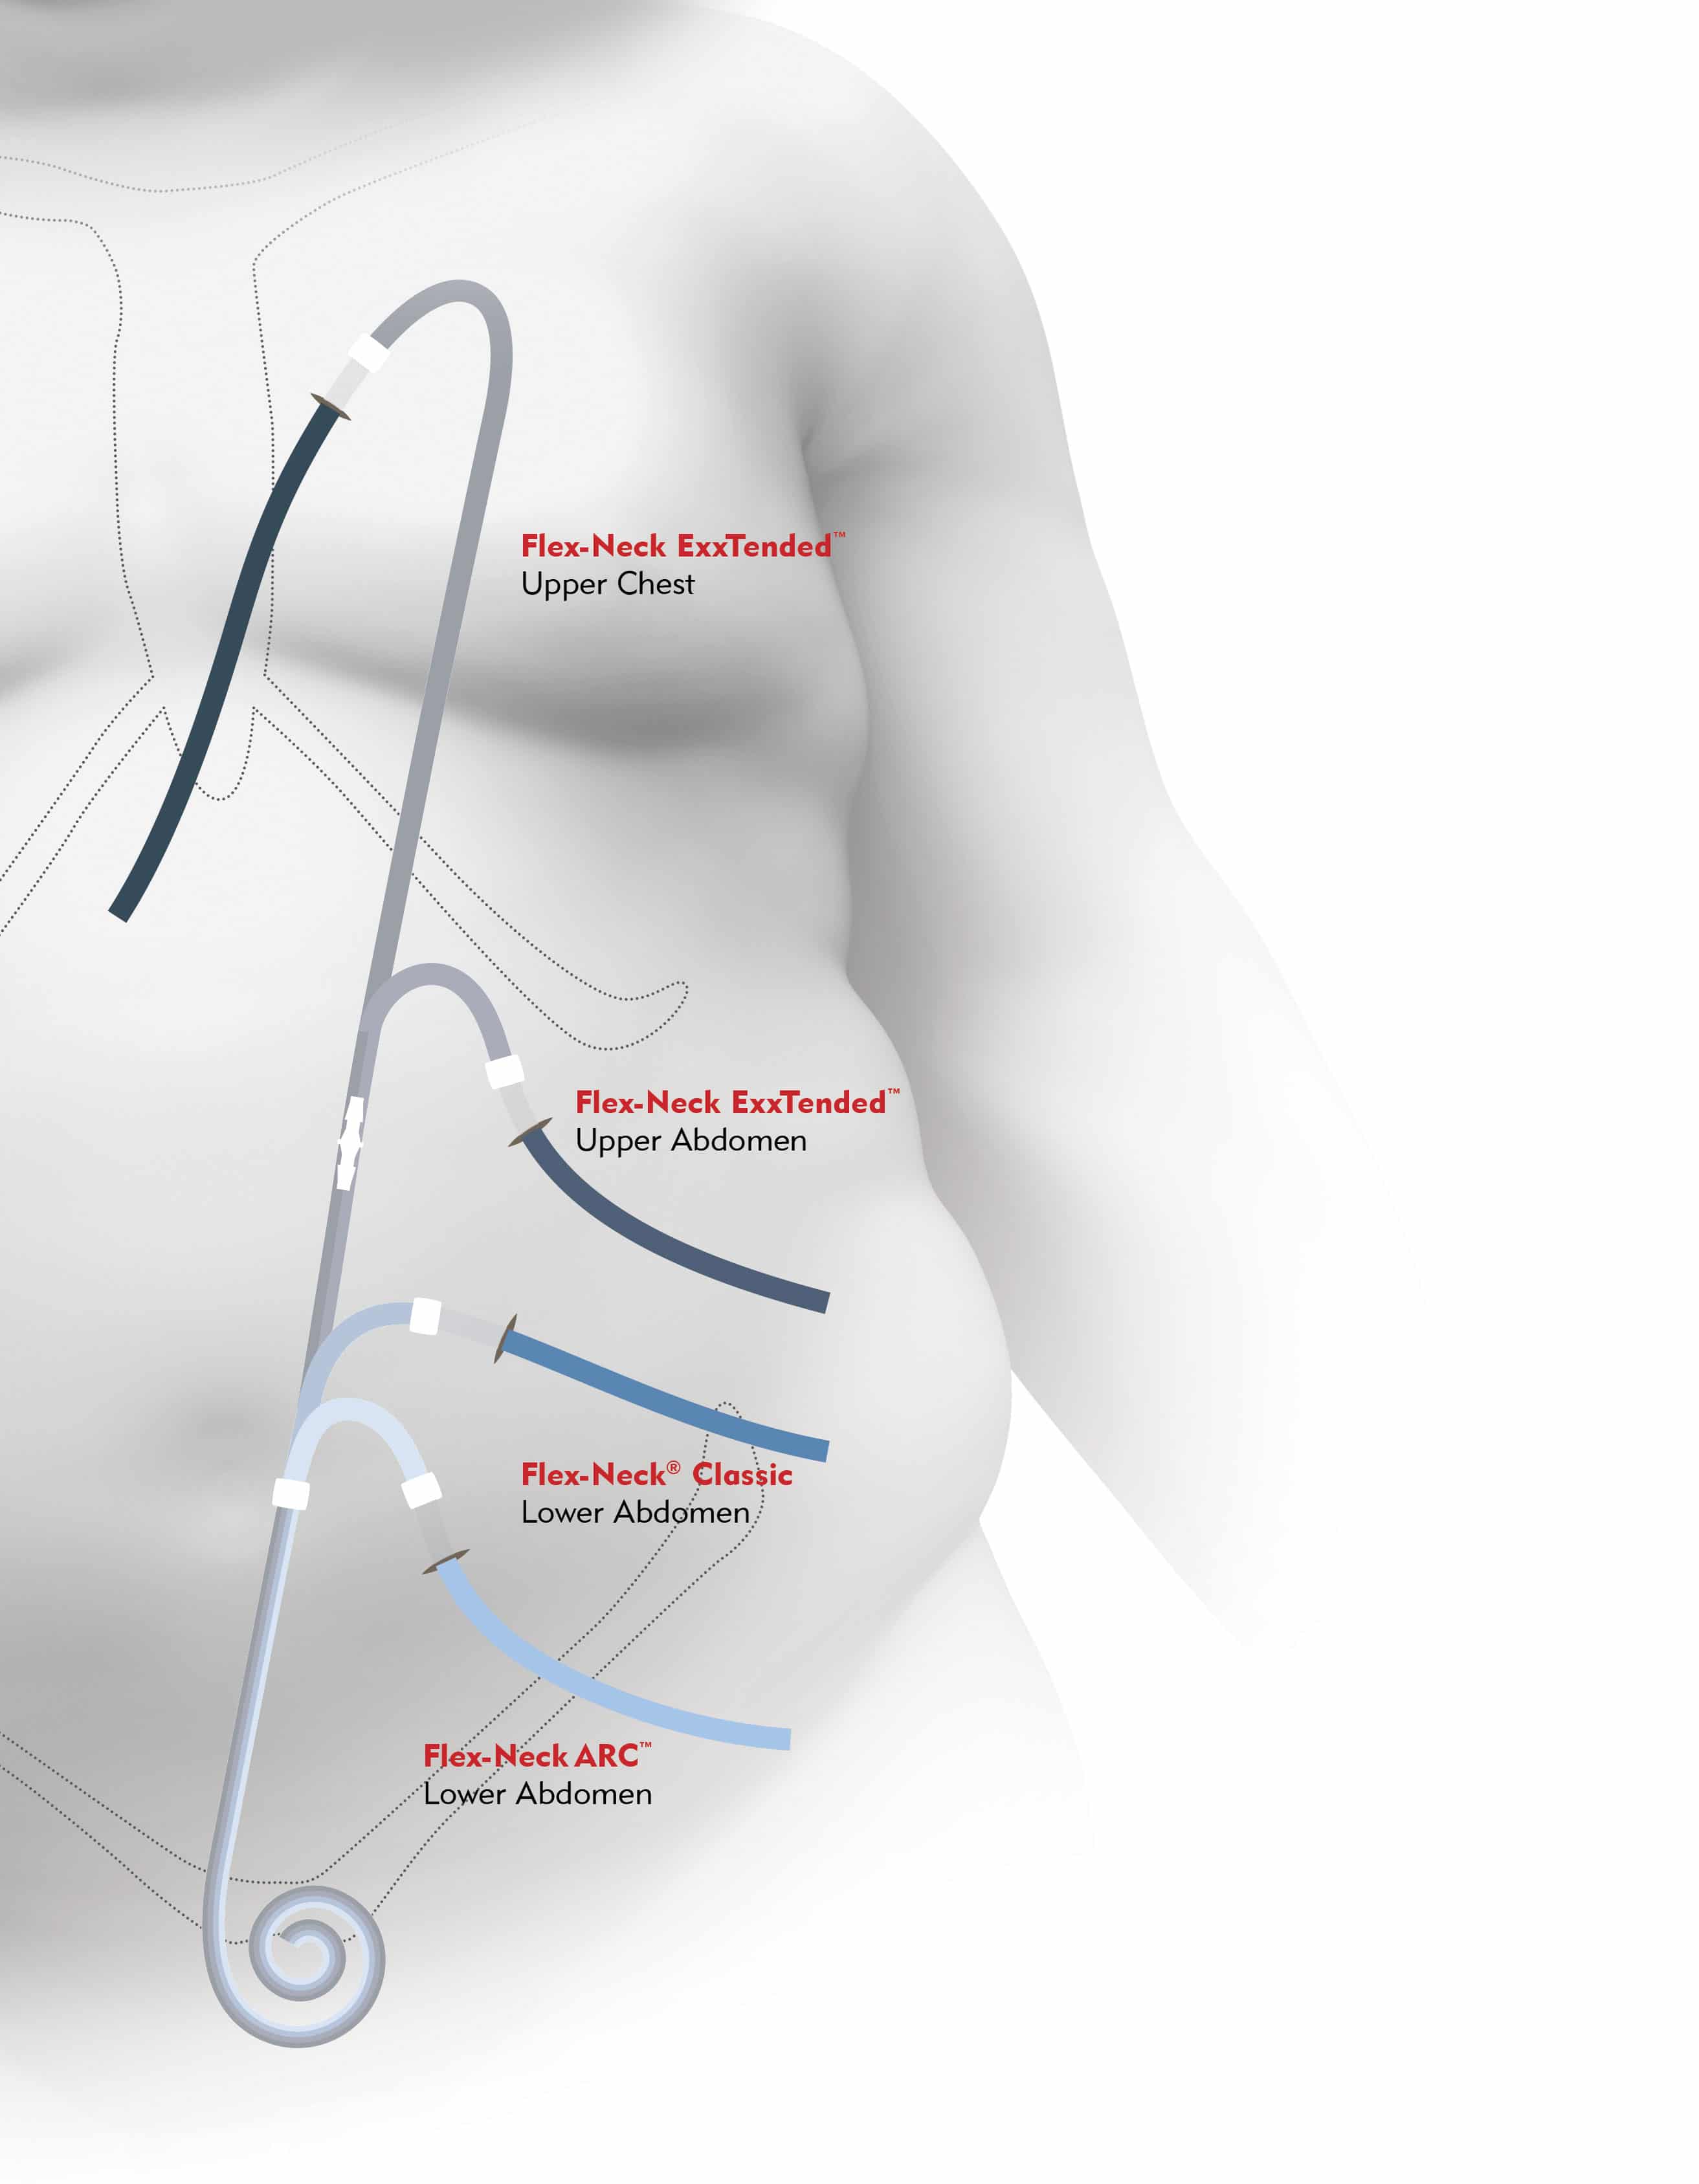 PD Catheter Placement in the body showing upper chest and abdomen, lower abdomen, and catheters with and without curves